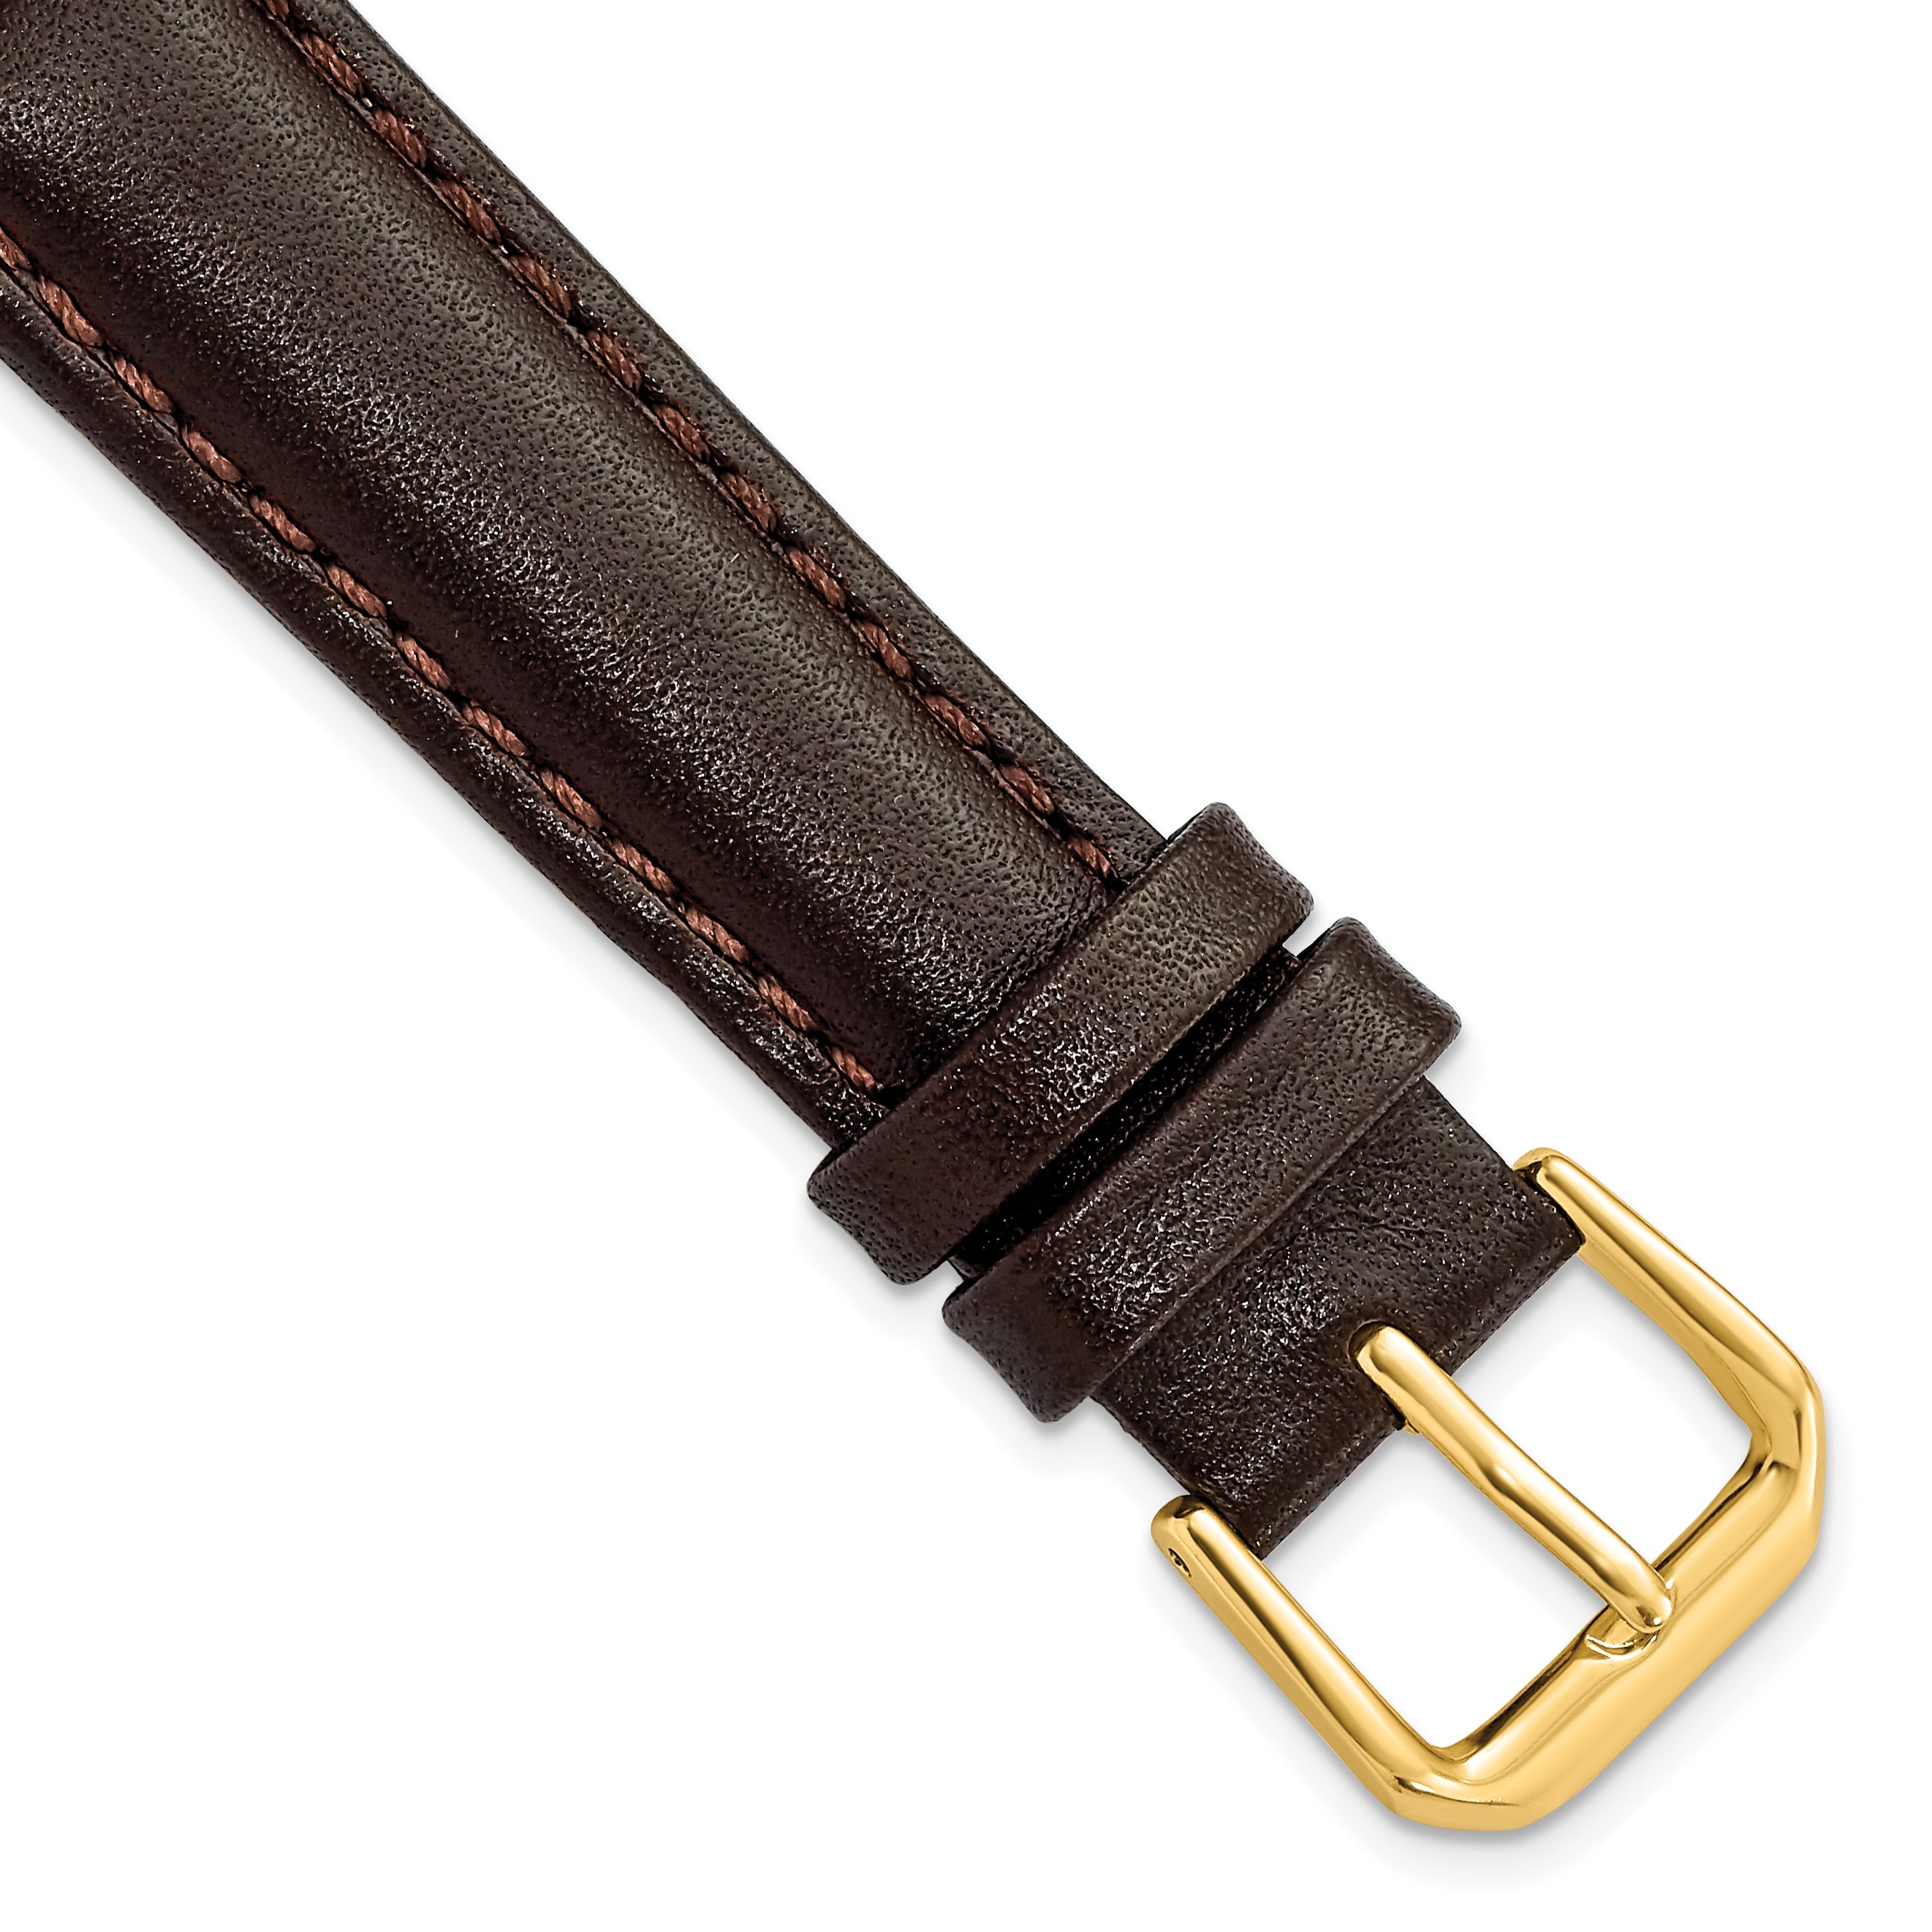 DeBeer 16mm Short Dark Brown Smooth Leather with Gold-tone Buckle 6.75 inch Watch Band